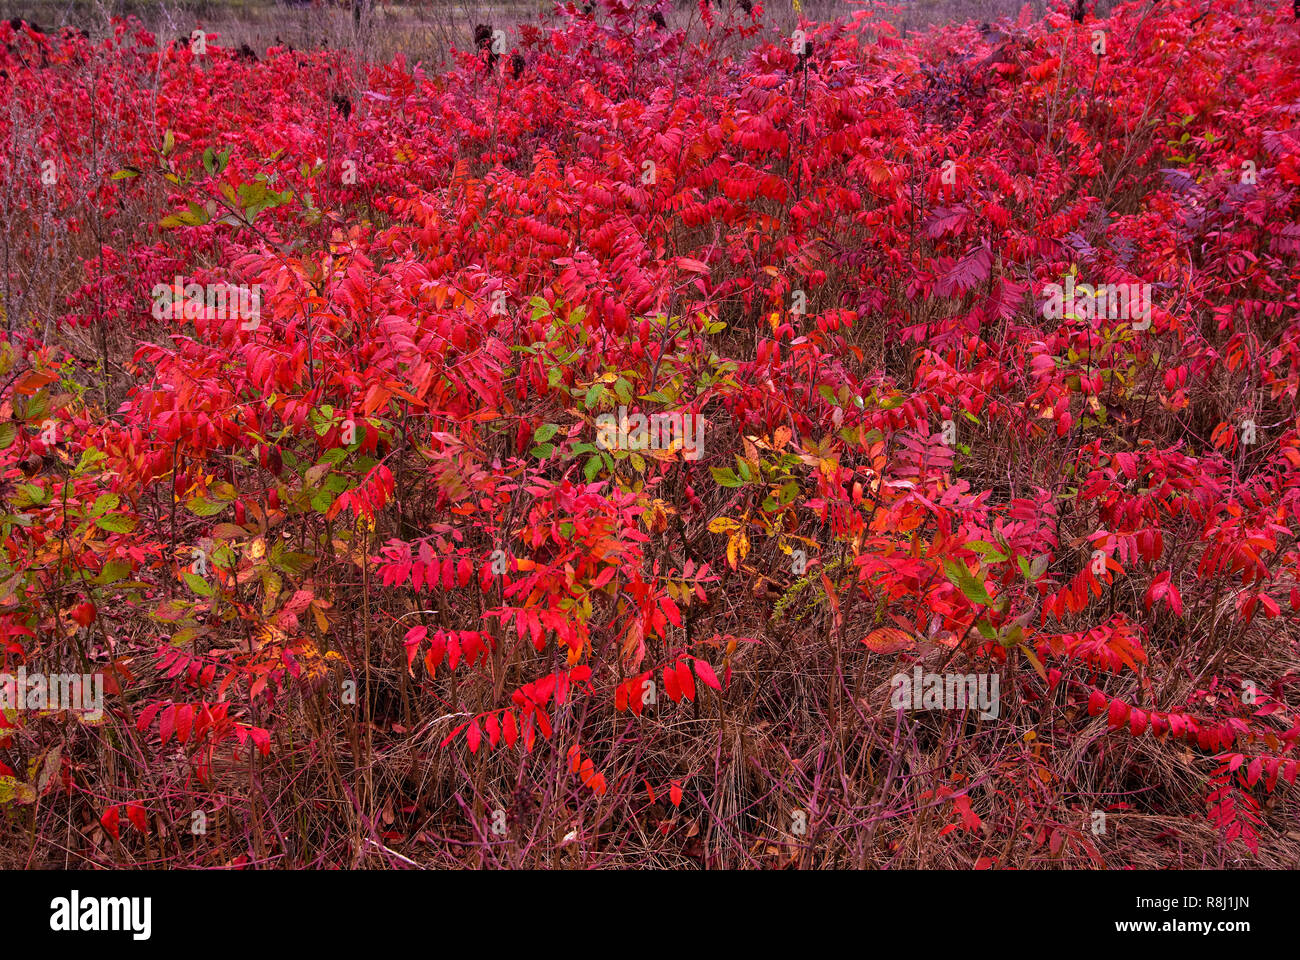 Winged sumac (Rhus capallina) and blackberry (Rubus fruiticosis) in meadow in late October in central Virginia. Stock Photo